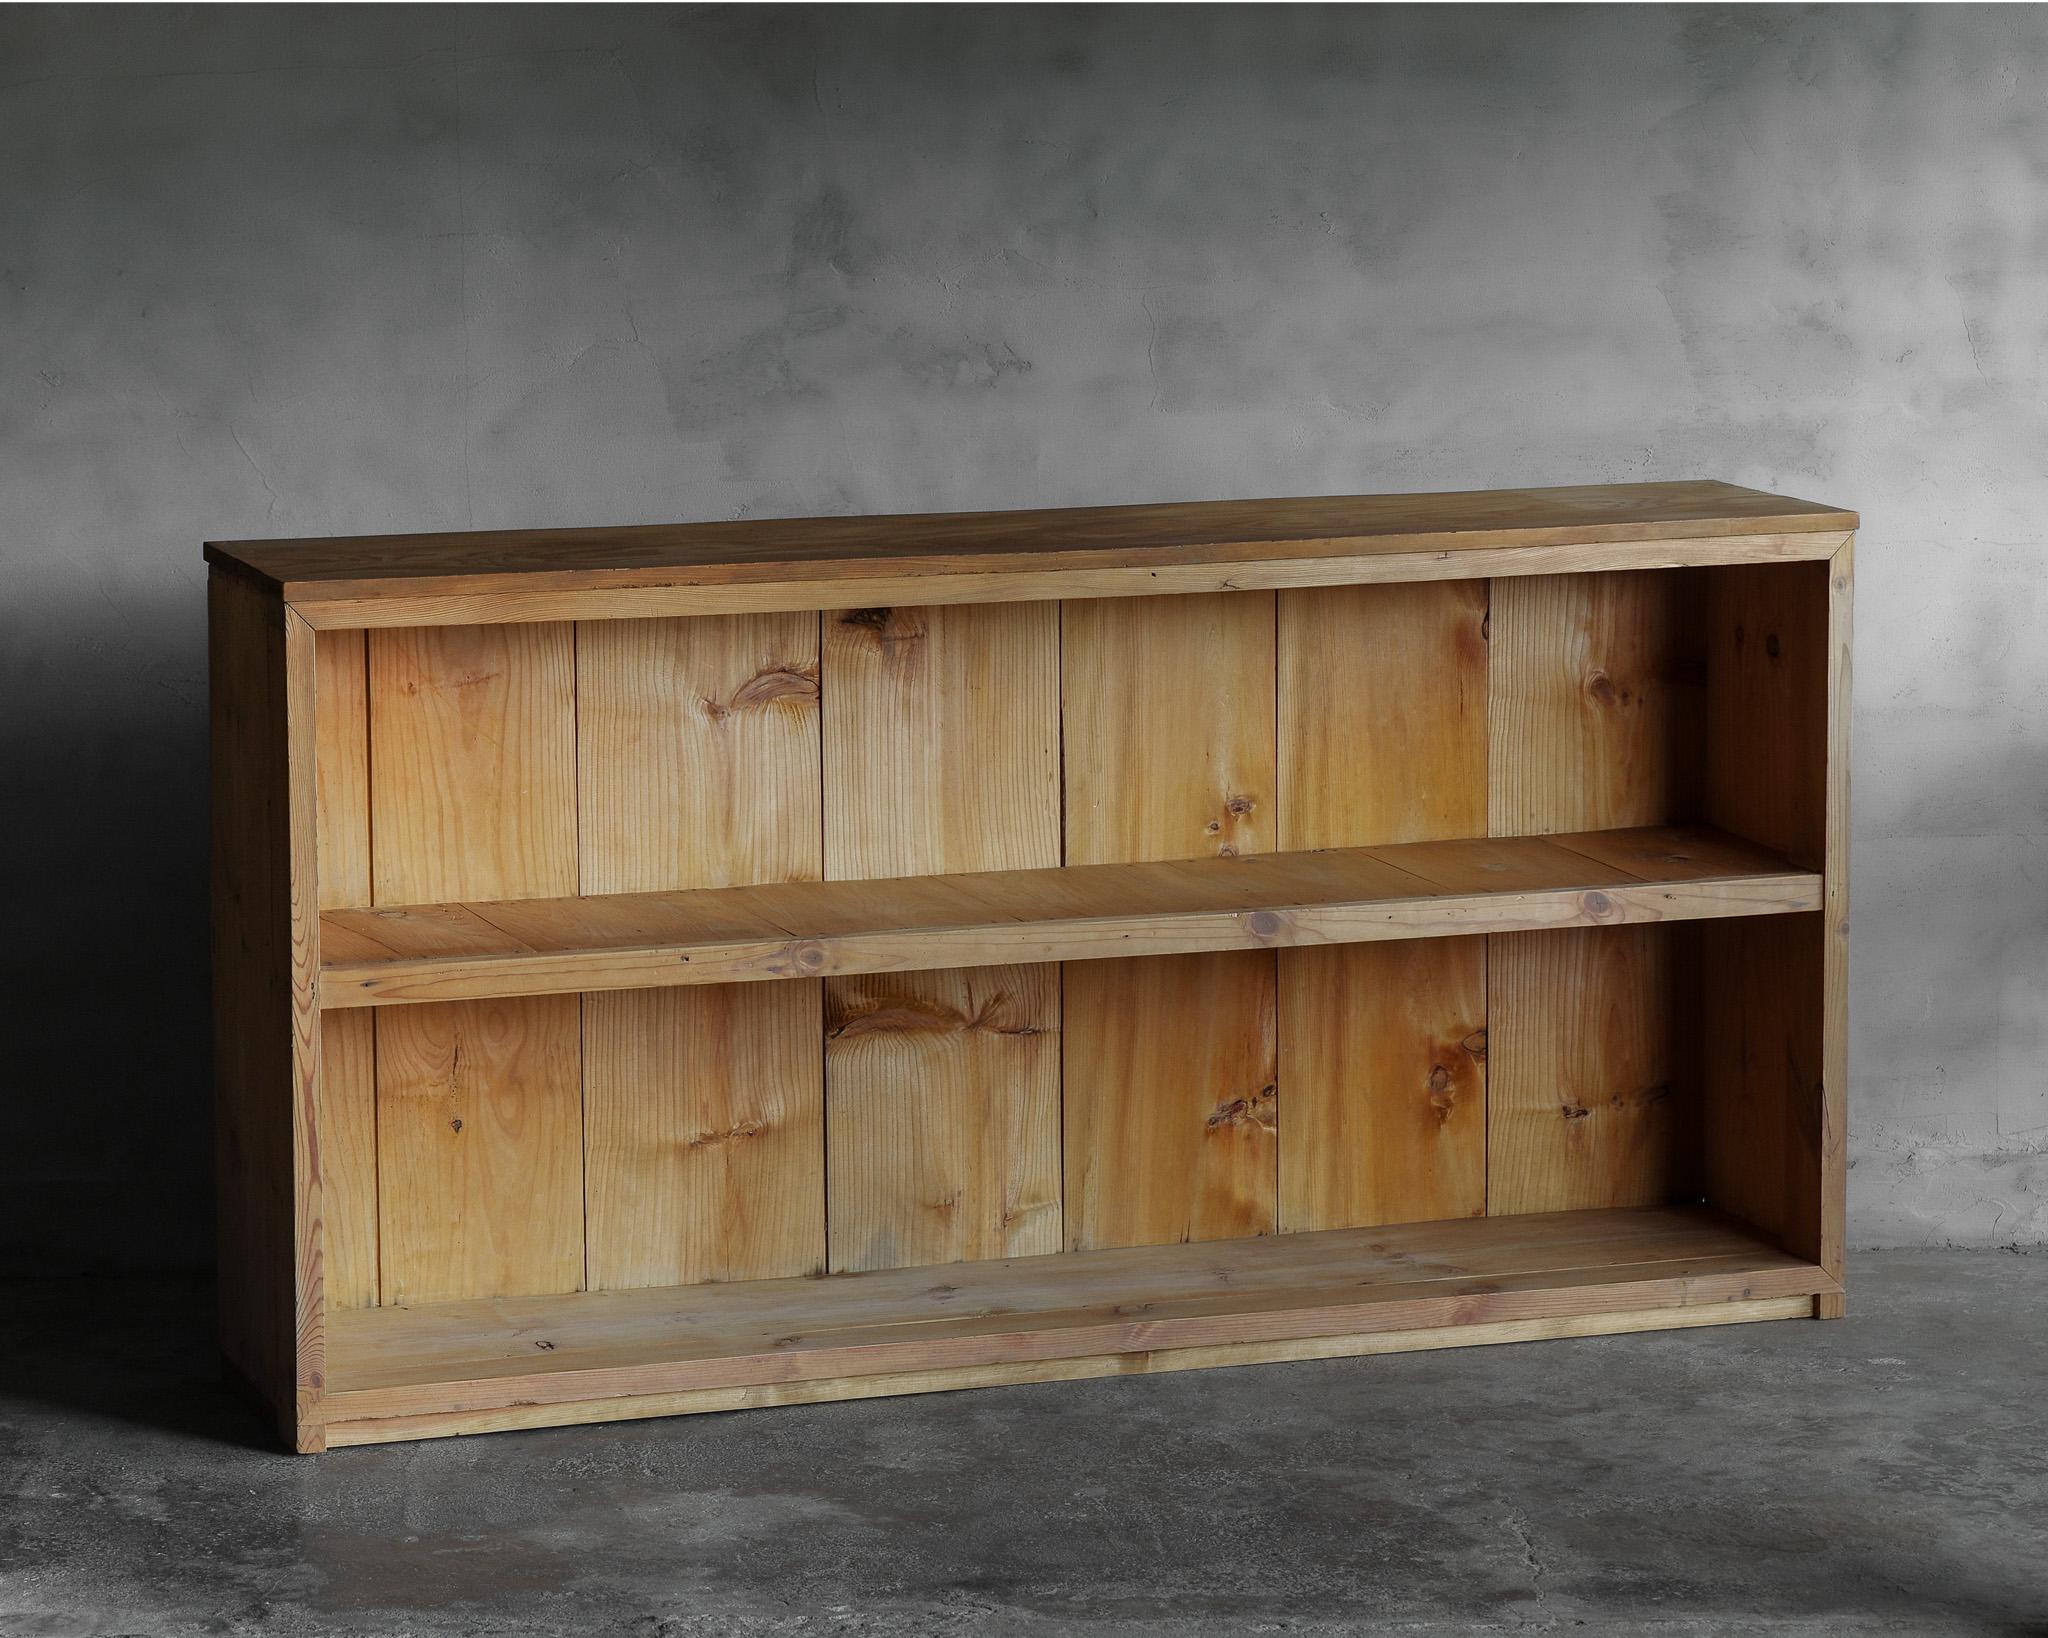 This is an old shelf made in Japan during the Taisho to early Showa period. 
It has a simple yet beautiful appearance. It is crafted from Japanese cedar and pine.
Having been thoroughly cleaned, you can experience the original color and texture of